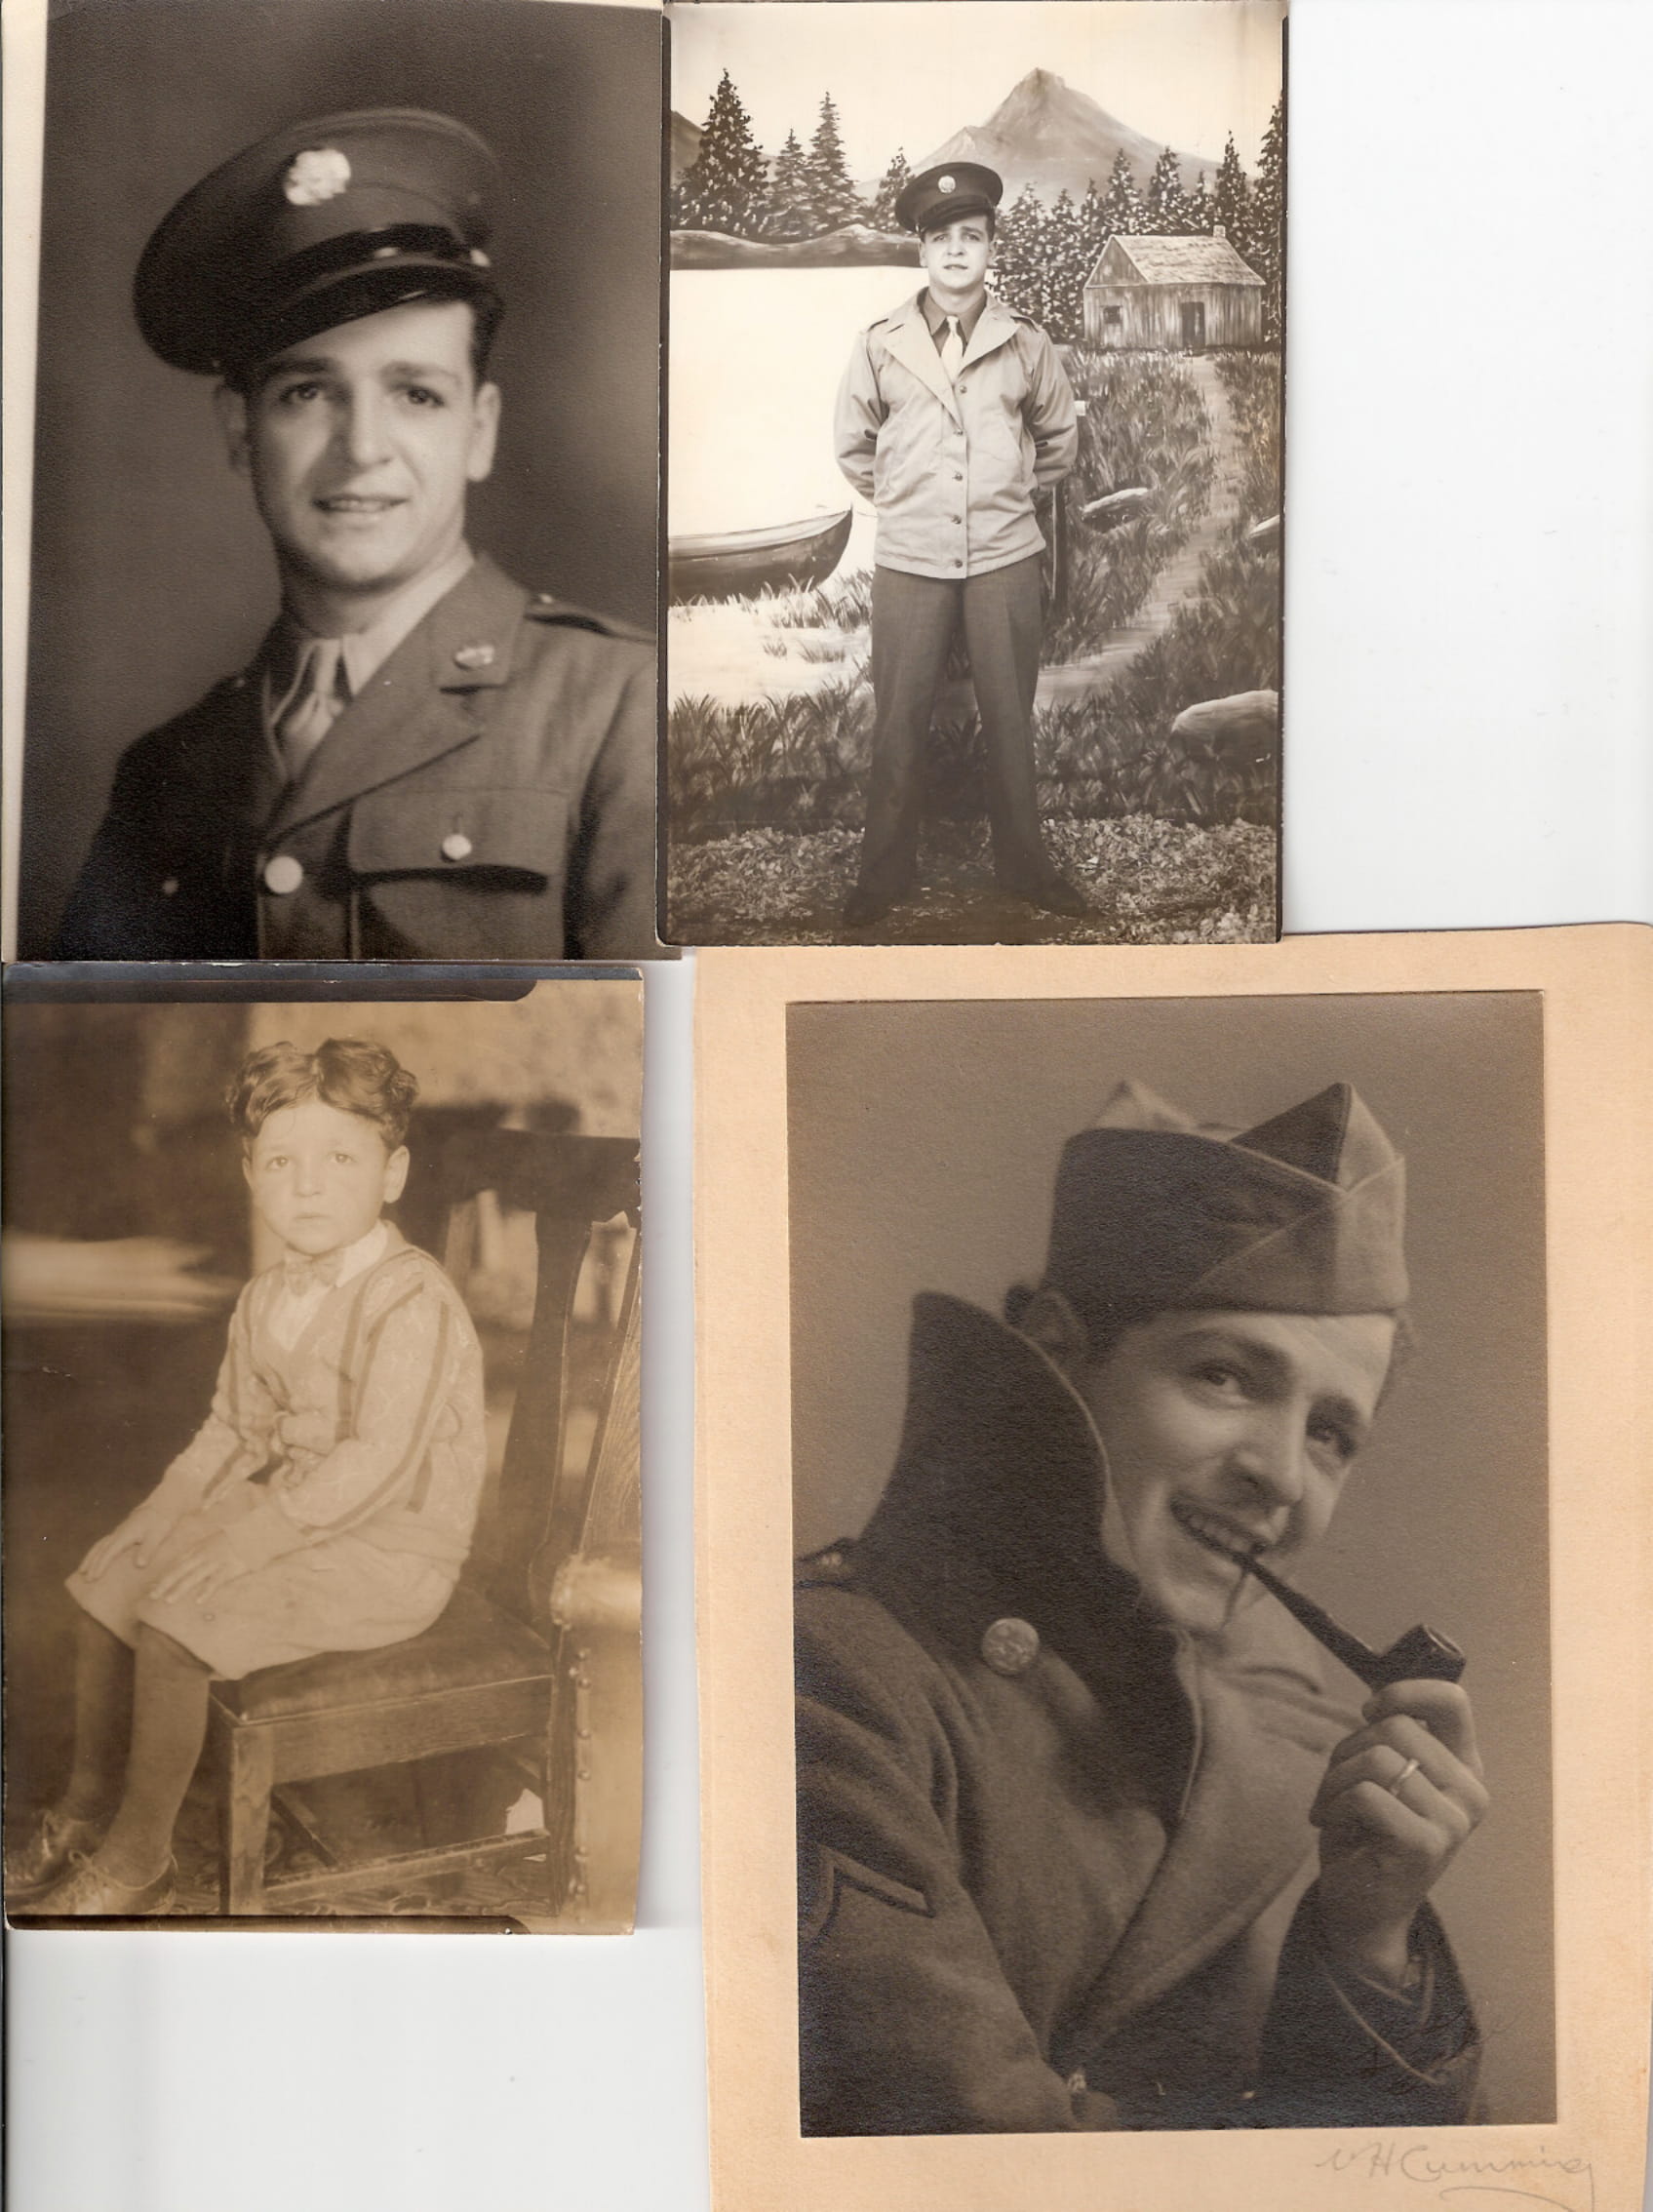 Four pictures of Private First Class Eake DeMarco from toddler age to serving in the U.S. Army.